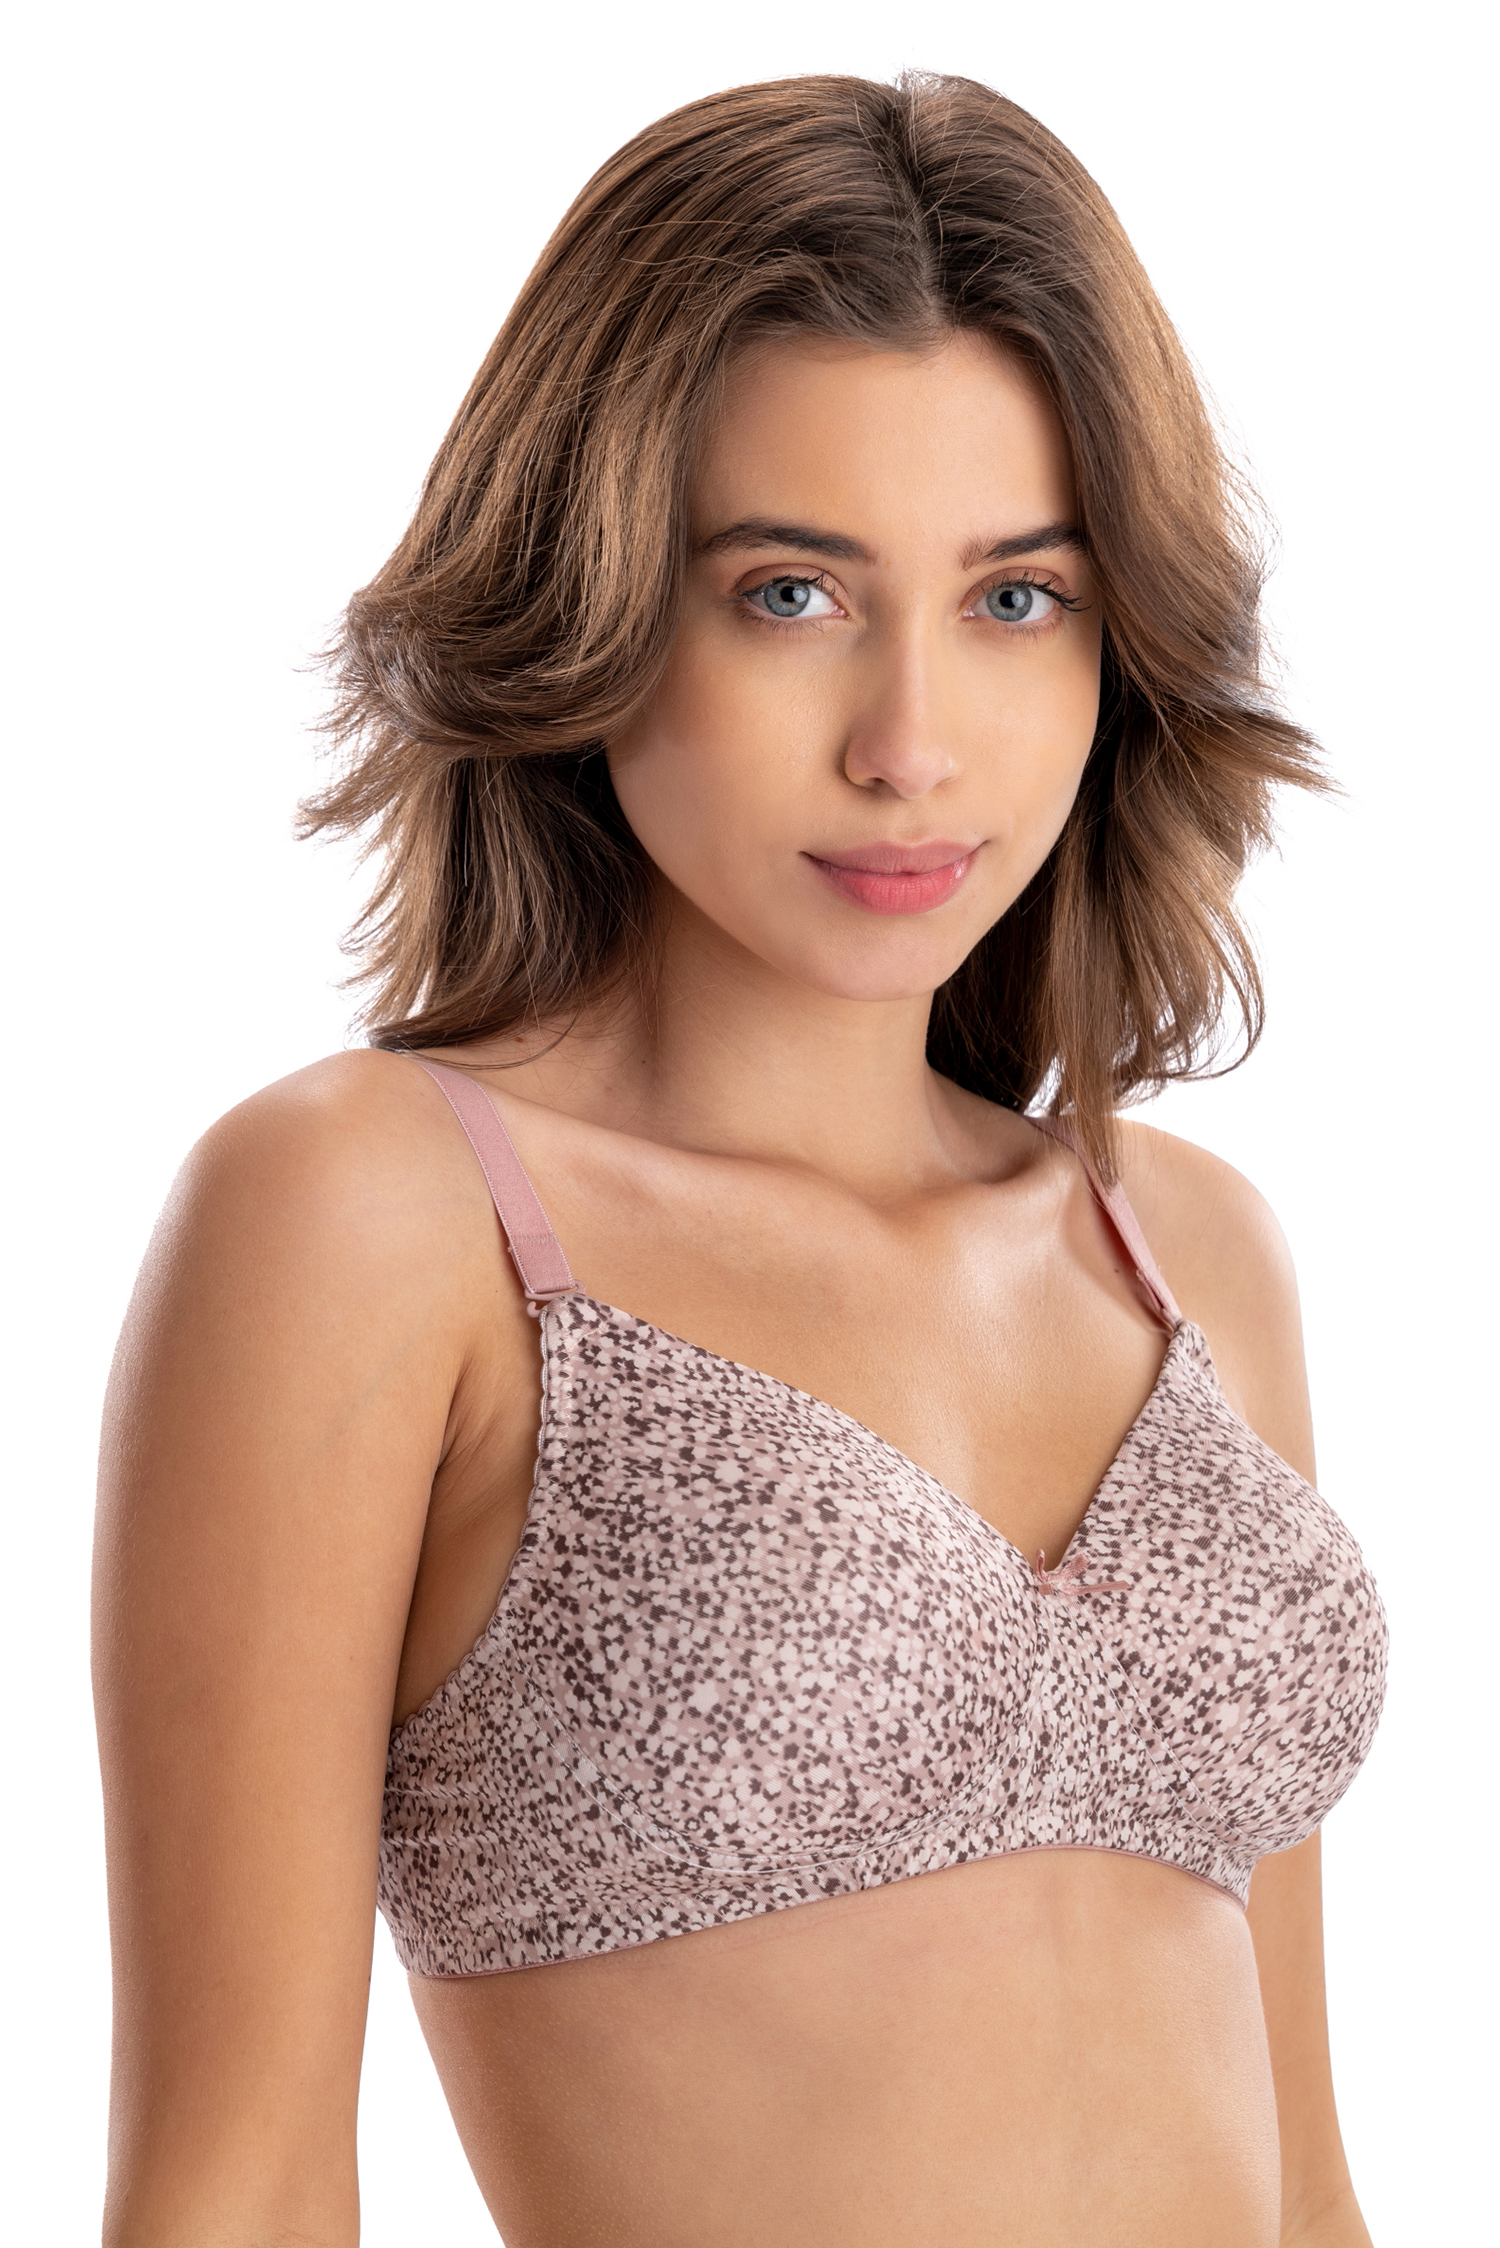 Women Full Coverage Non Padded Bra (Grey) – AAVOW